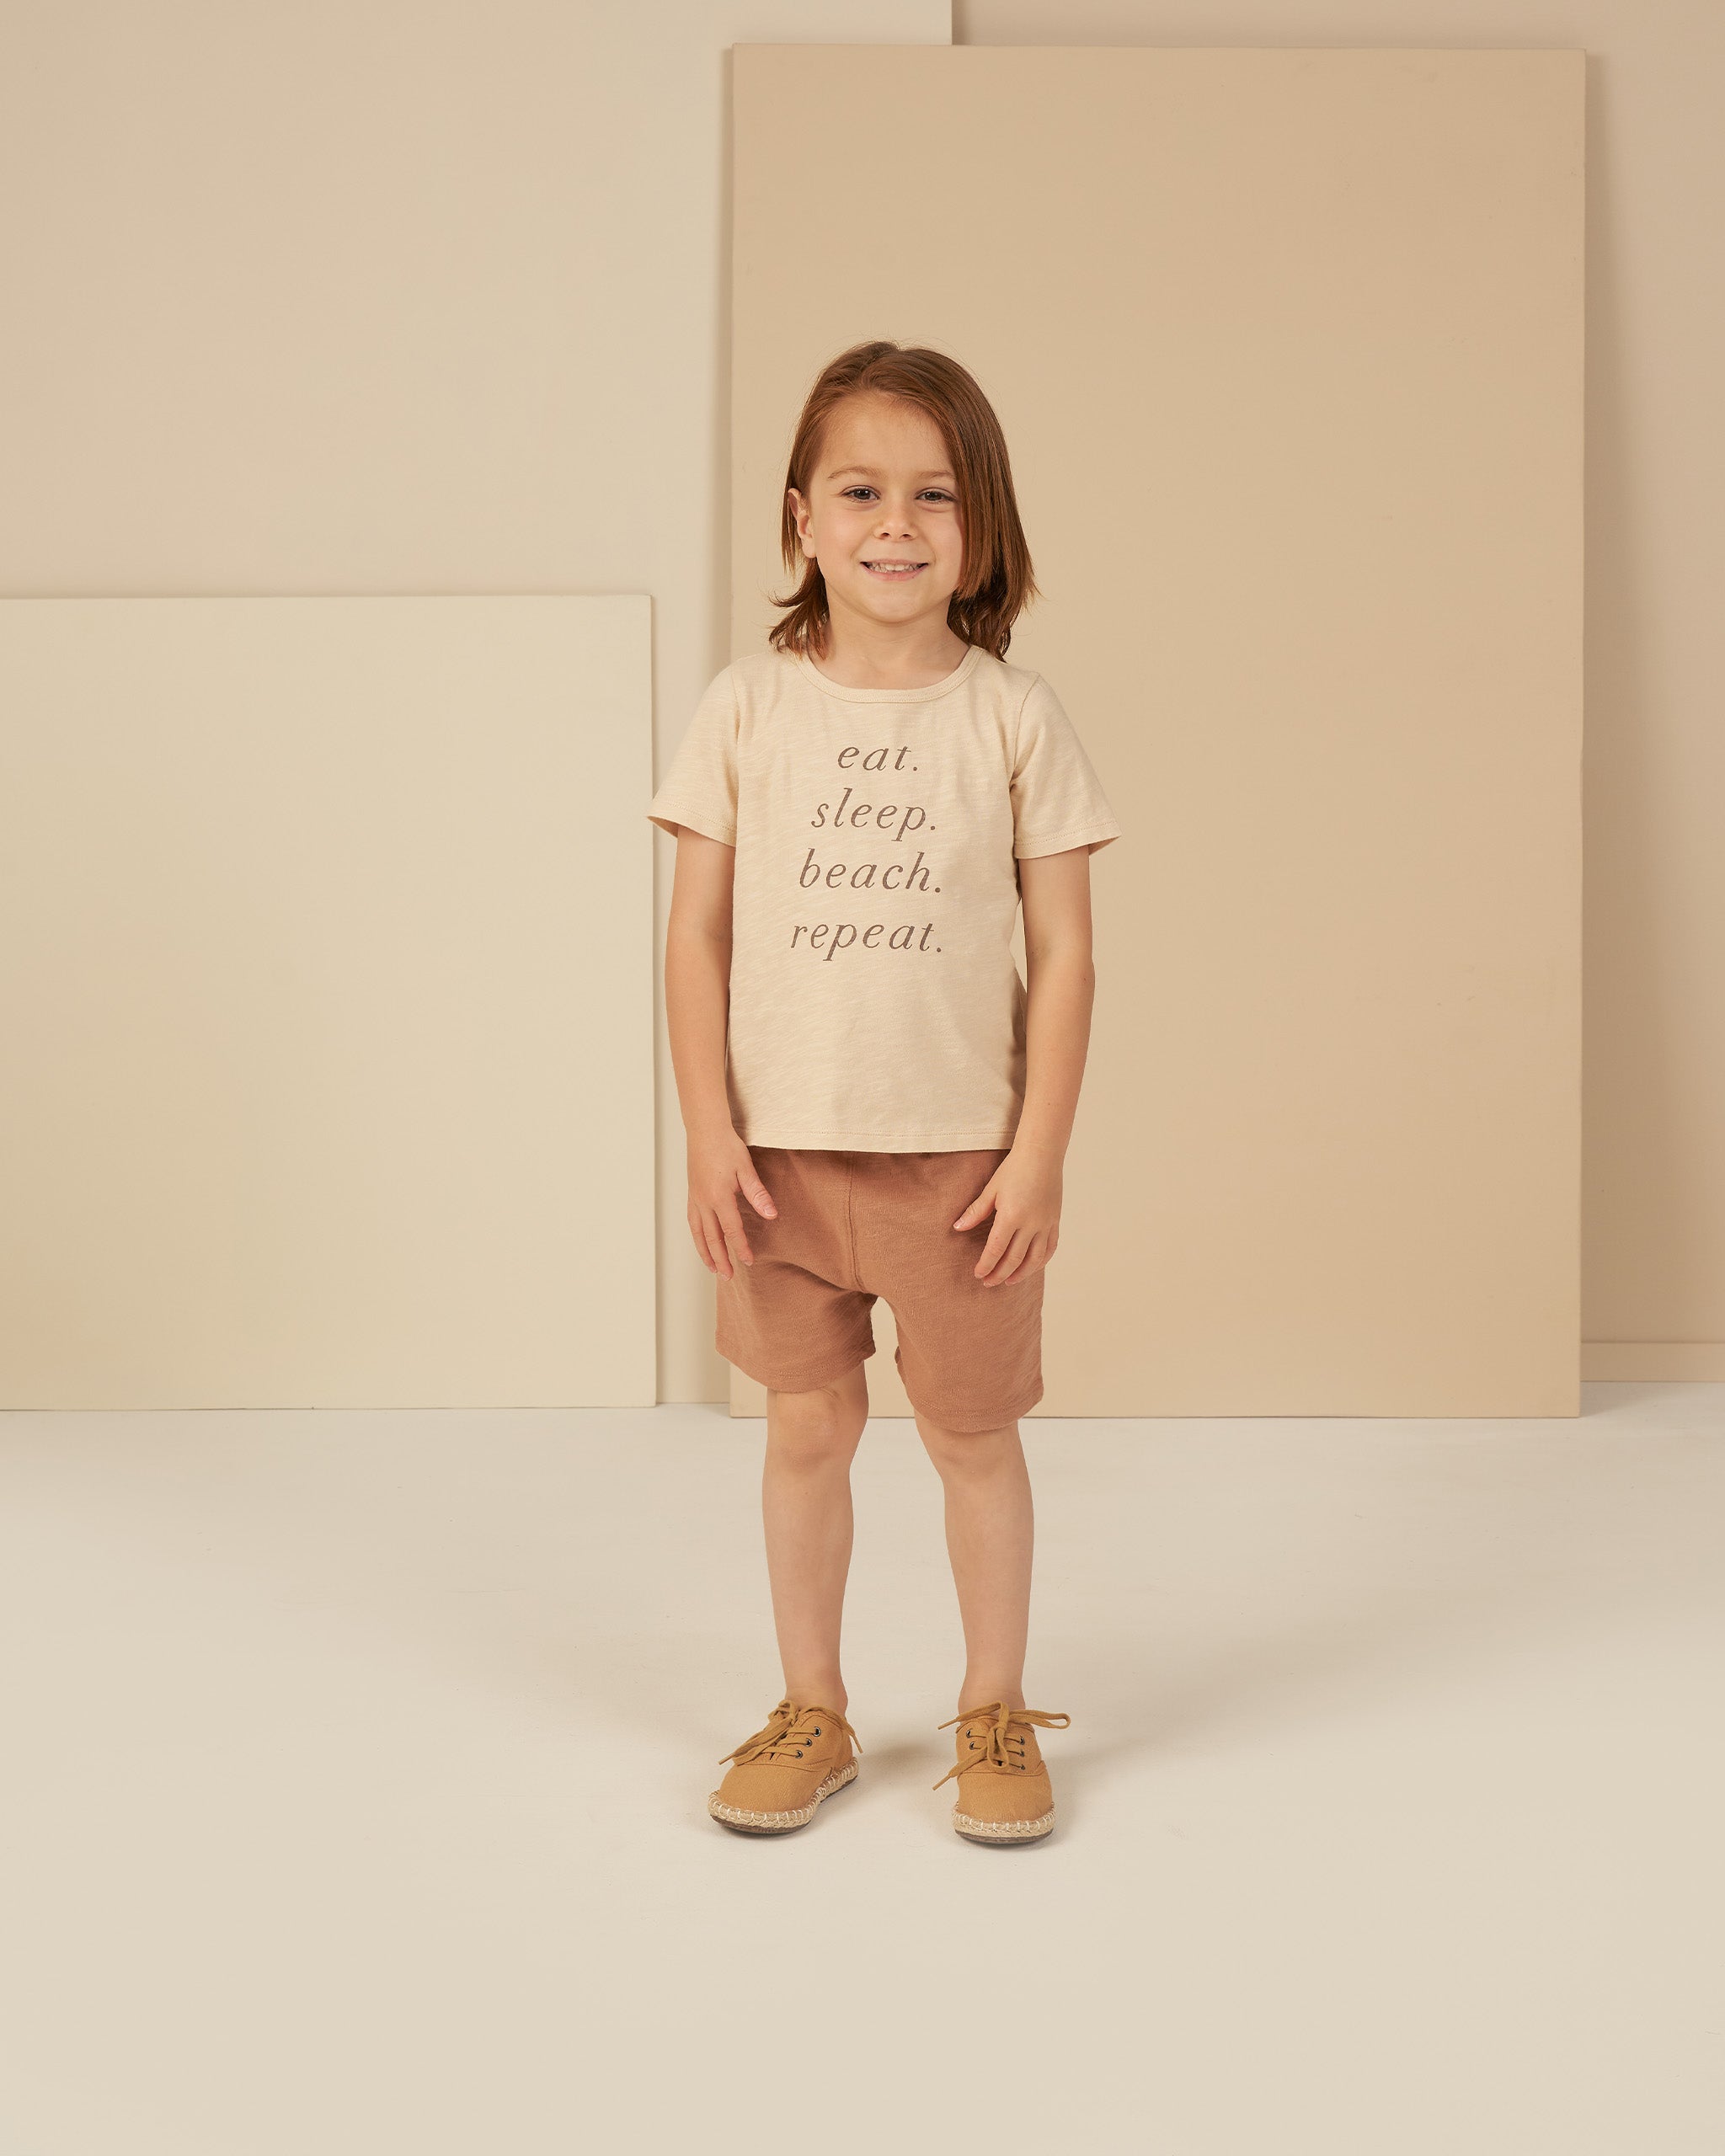 Basic Tee || Eat. Sleep. Beach. Repeat. - Rylee + Cru | Kids Clothes | Trendy Baby Clothes | Modern Infant Outfits |